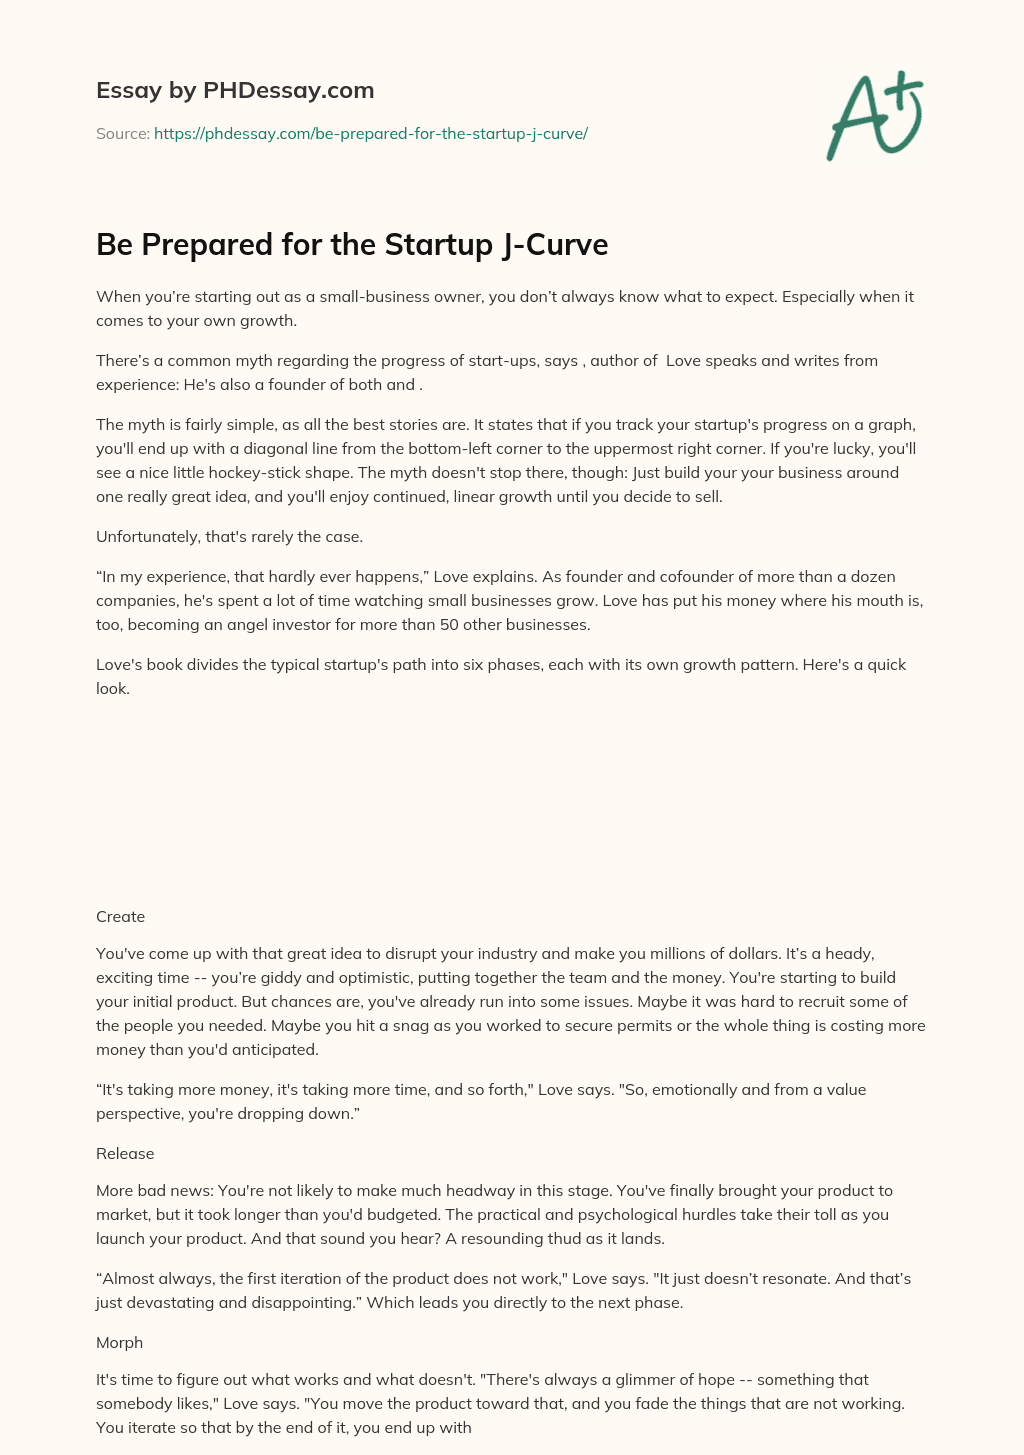 Be Prepared for the Startup J-Curve essay